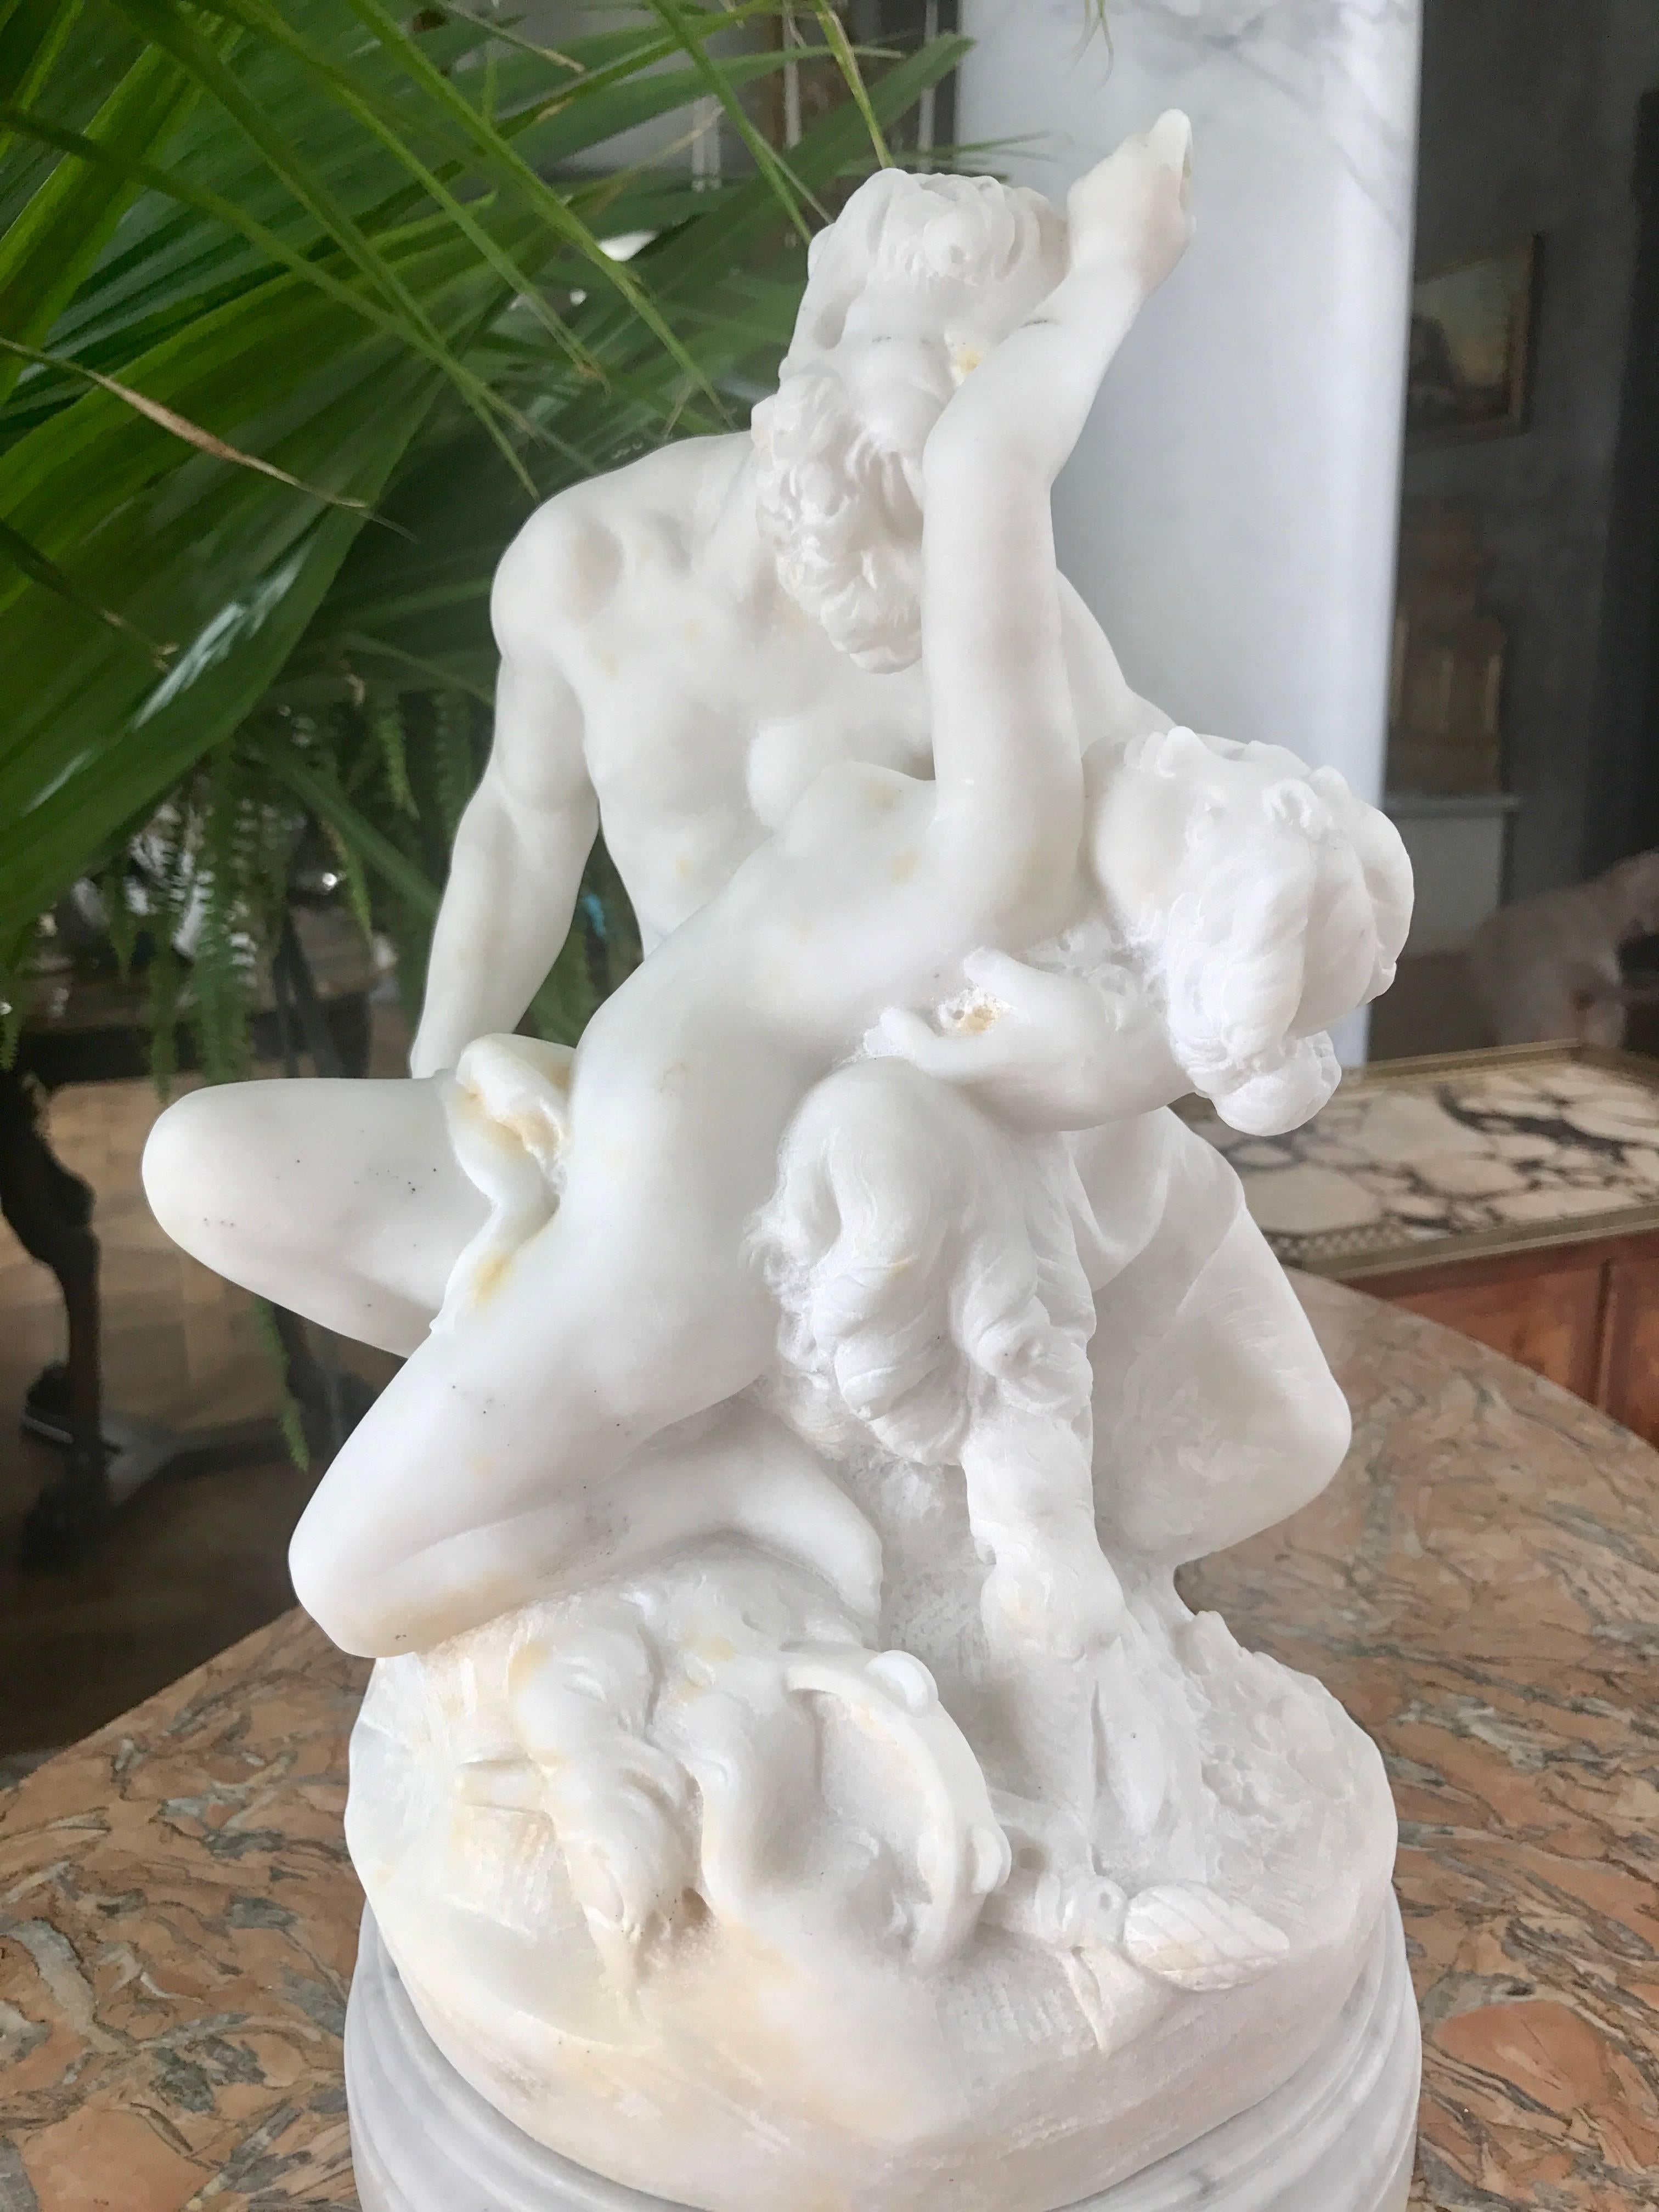 Masterfully executed marble sculpture of Marsyas with lover.
French after the Greek Antique 
Ca 1780
